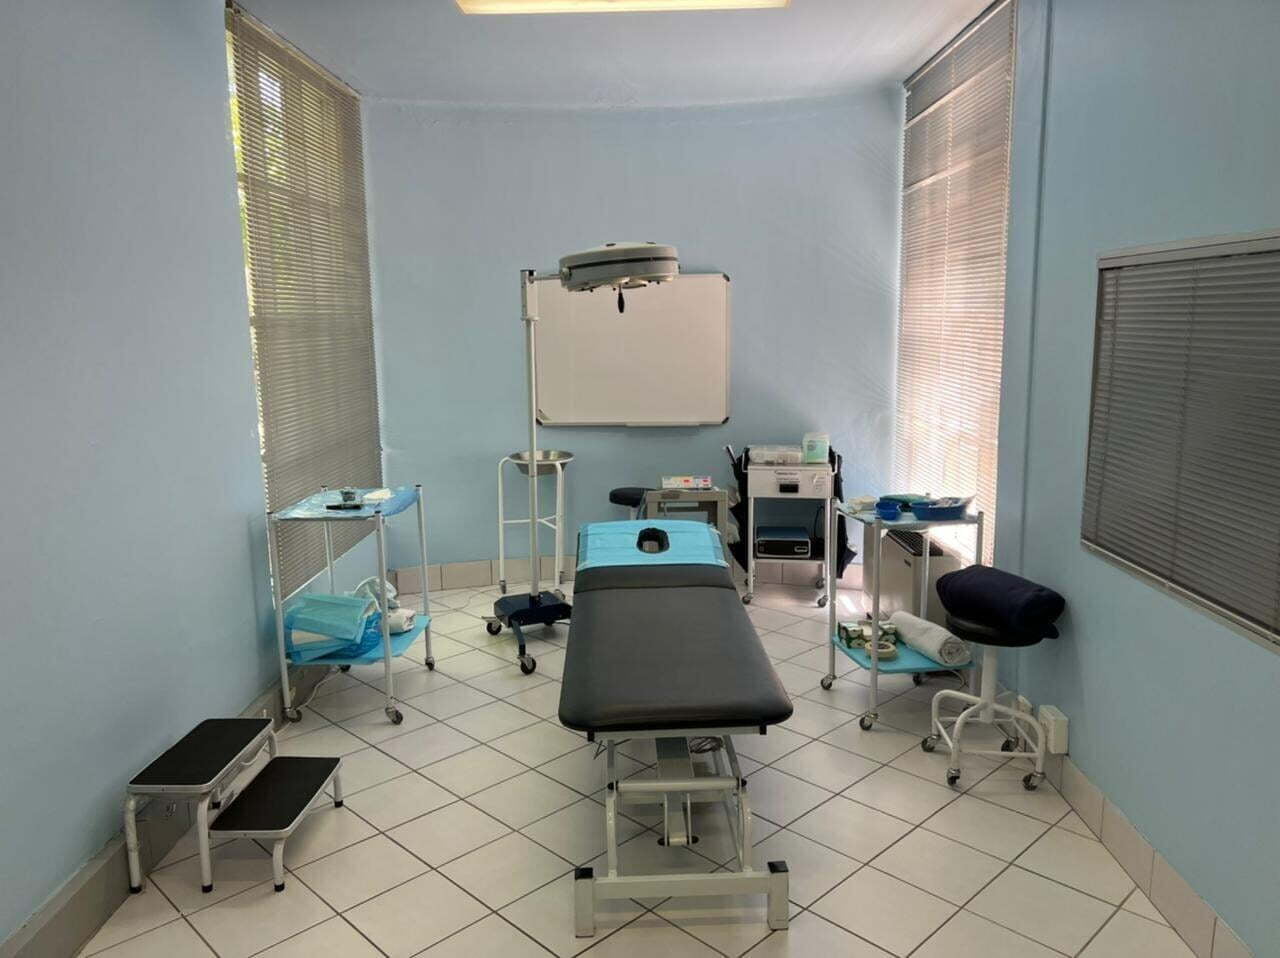 One of the treatment rooms at The Headache Clinic.